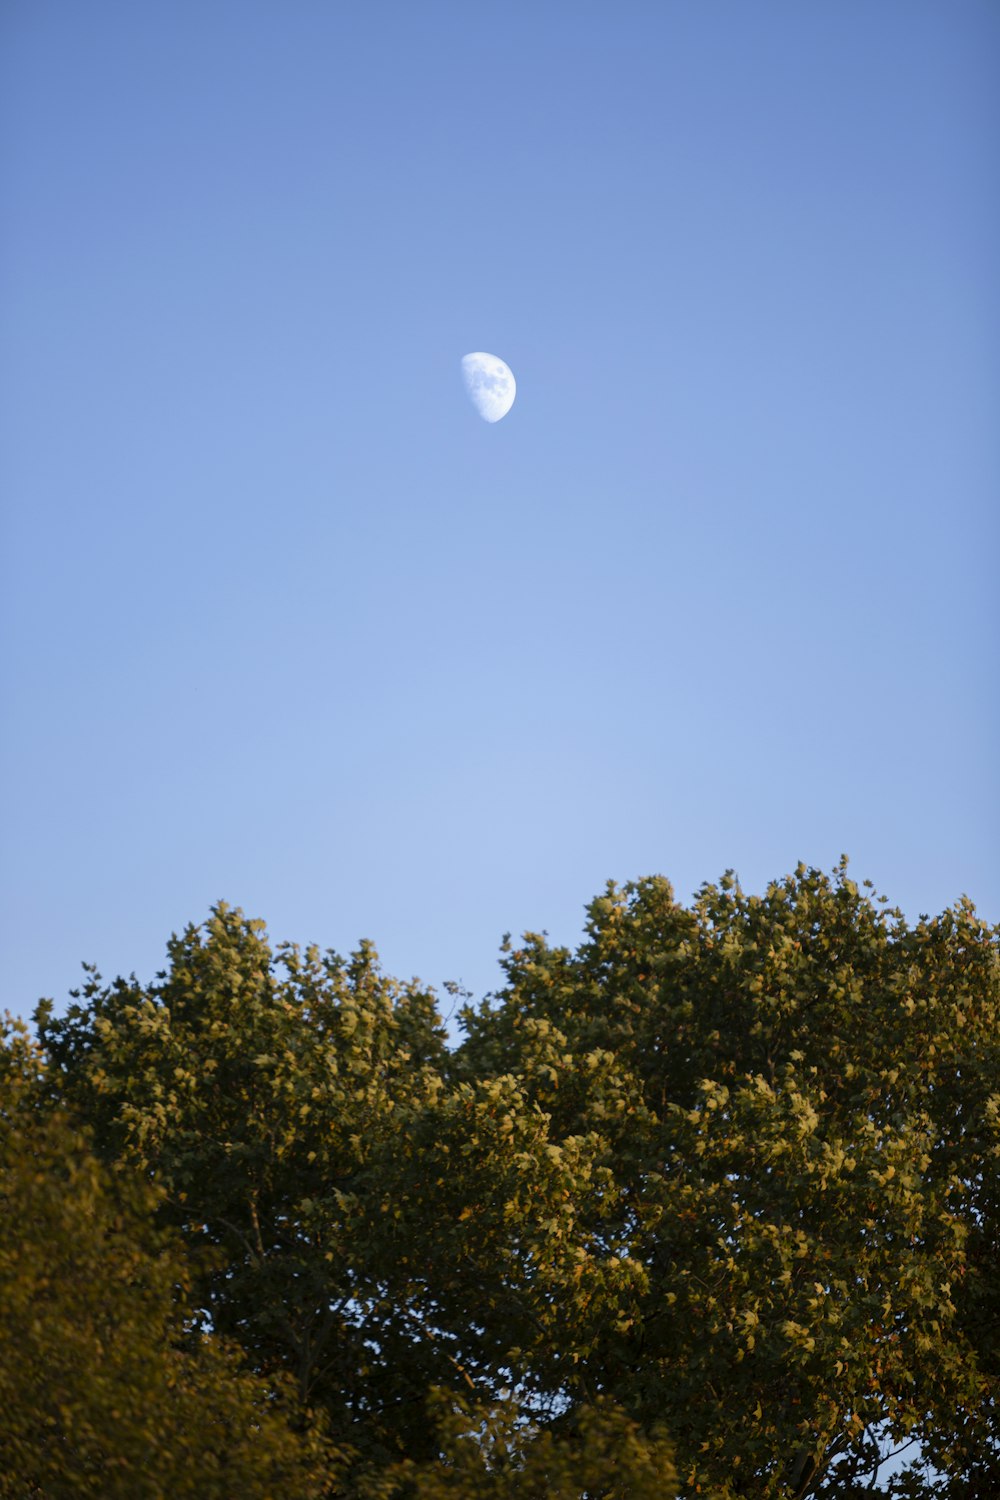 the moon is visible in the sky above the trees